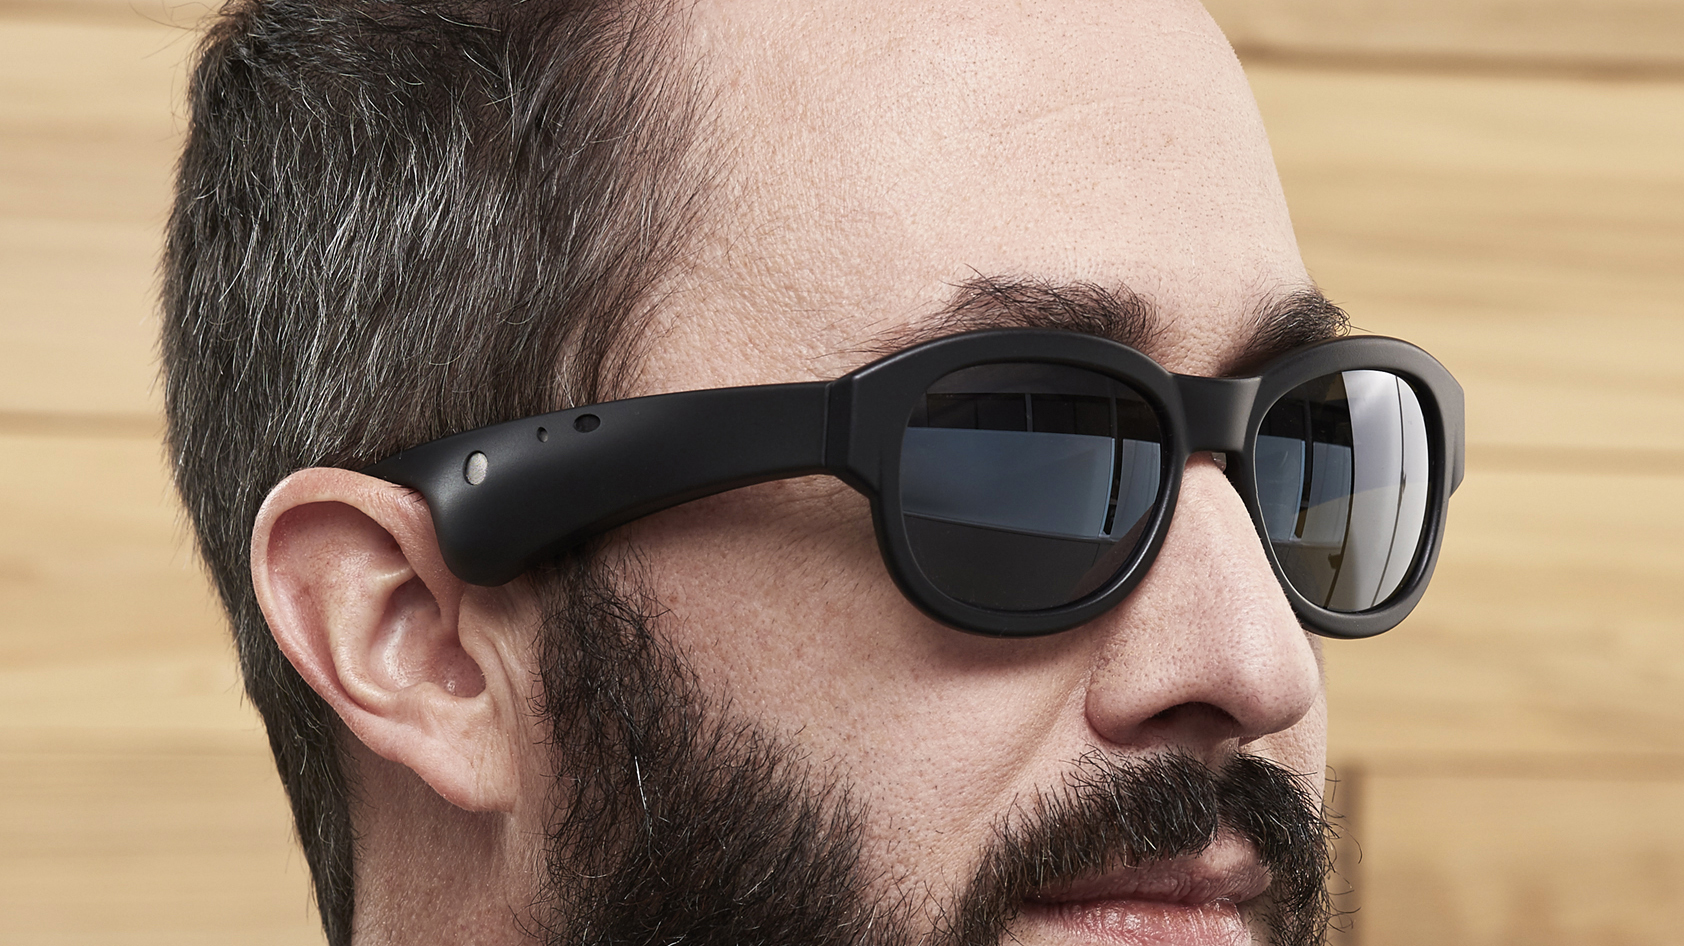 A manufacturer-supplied image of the Bose AR glasses being worn by a bearded man